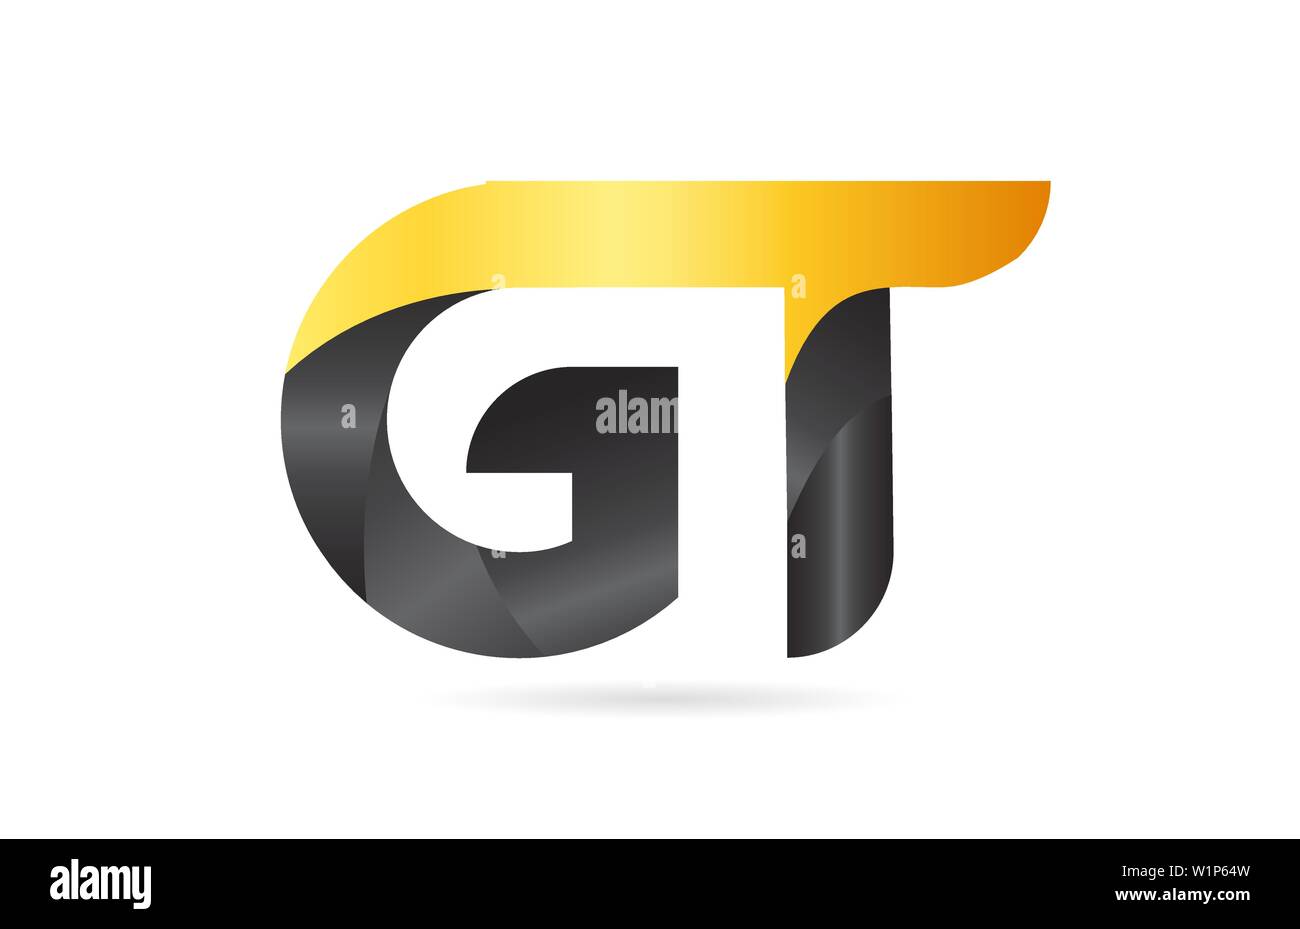 Joined Or Connected Gt G T Yellow Black Alphabet Letter Logo Combination Suitable As An Icon Design For A Company Or Business Stock Vector Image Art Alamy